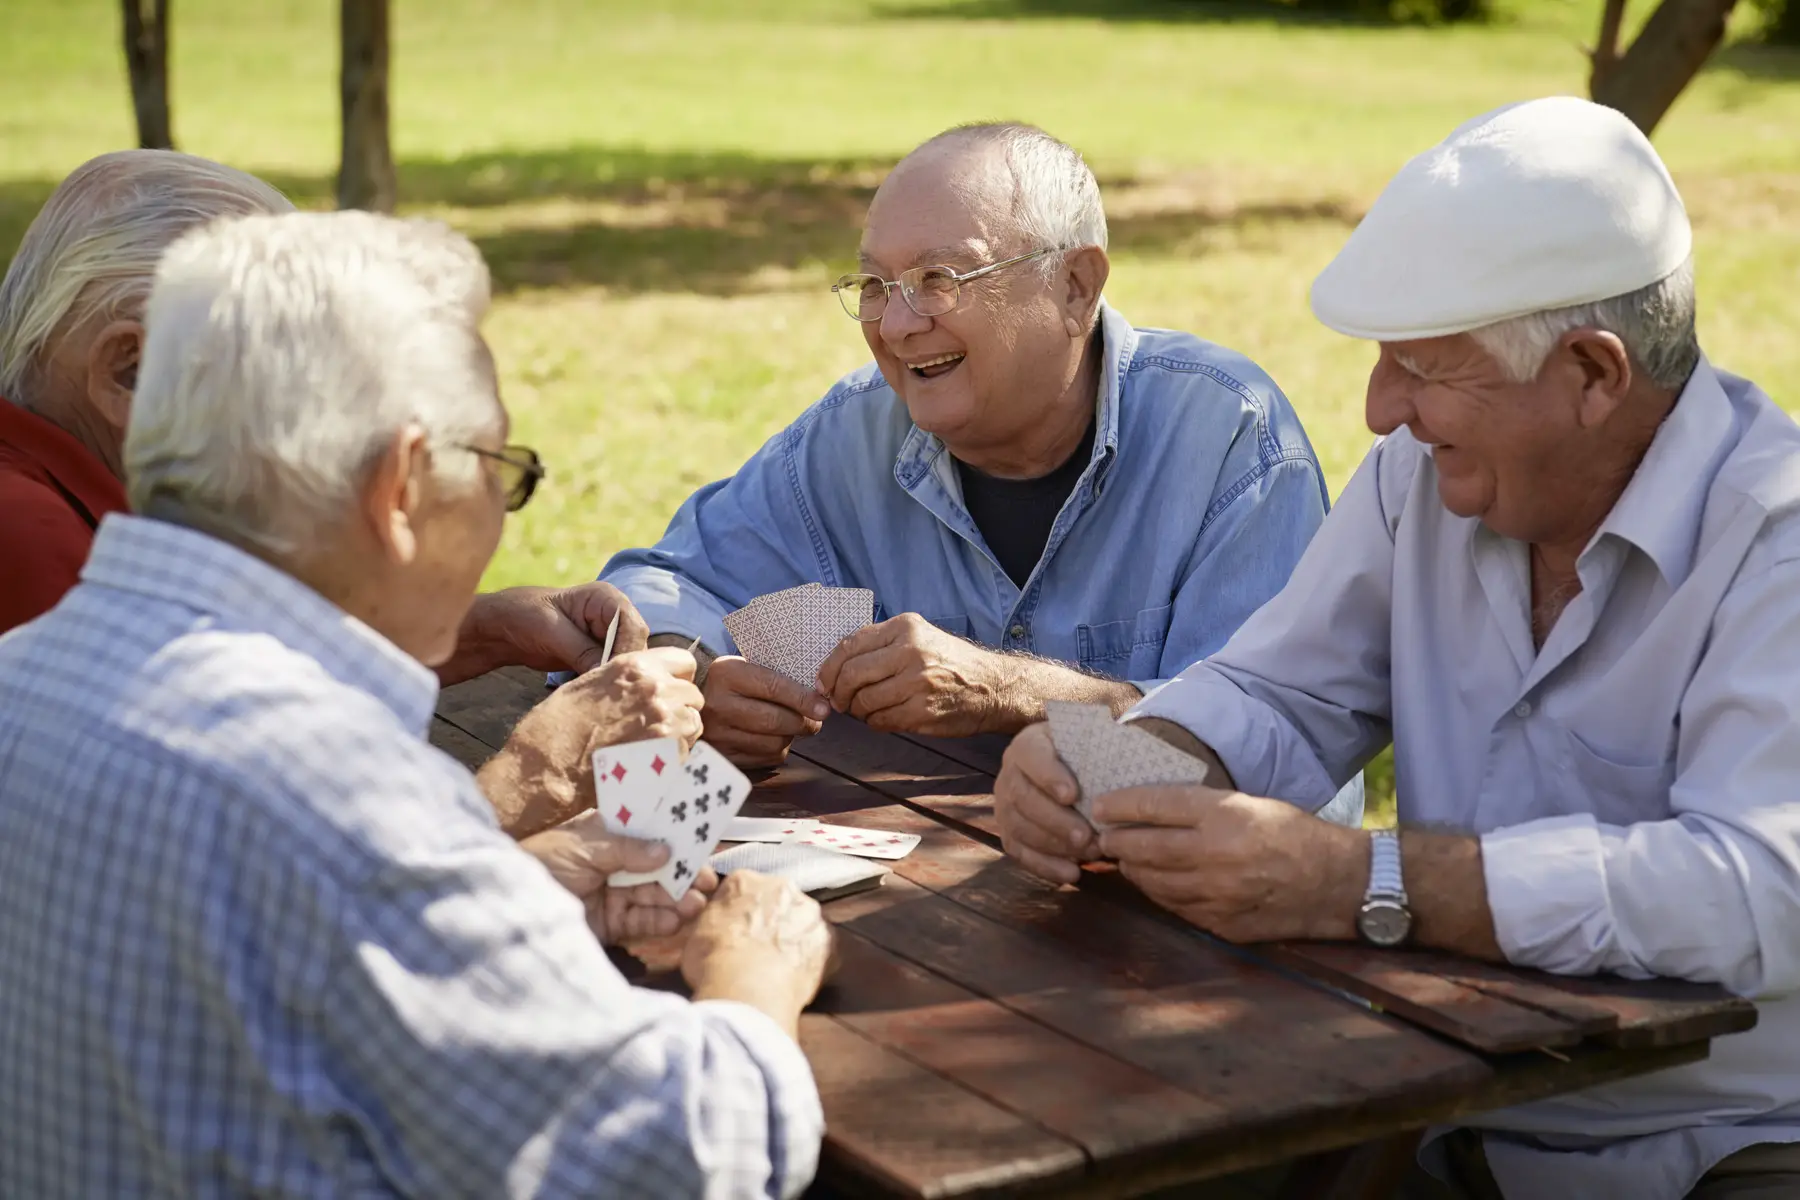 elderly men playing cards at picnic bench in a park